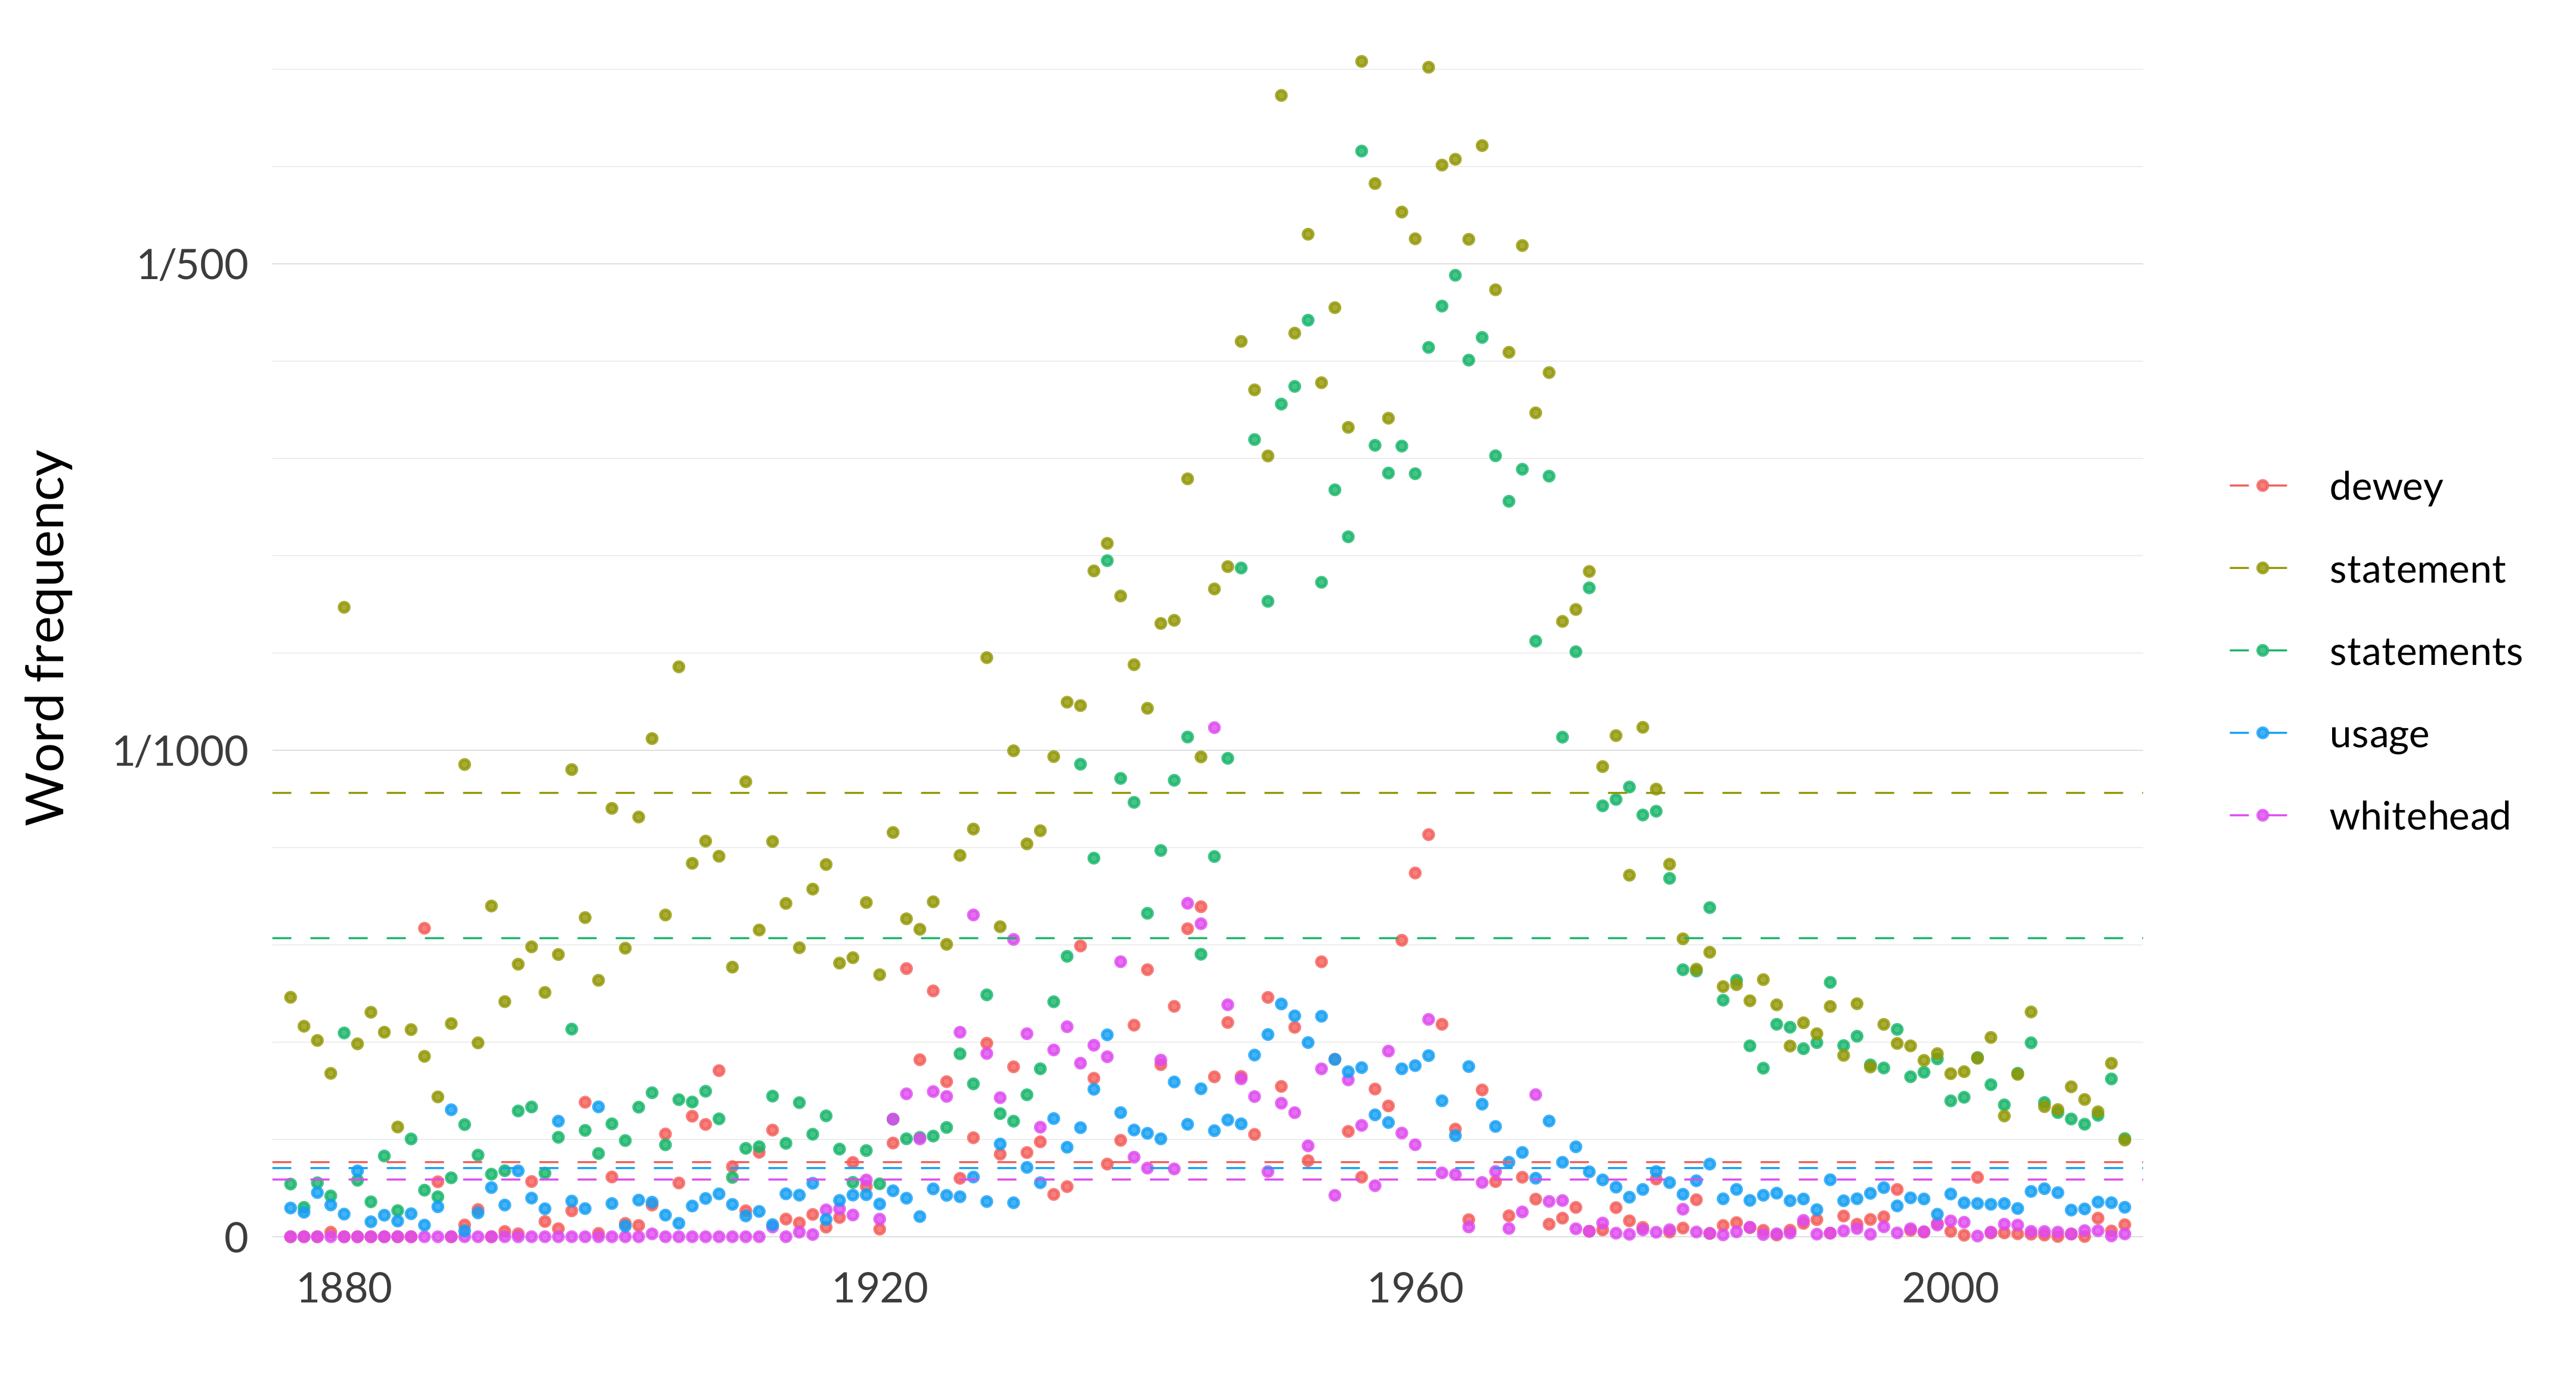 A scatterplot showing the frequency of the words dewey, statements, whitehead, usage, statement. The word dewey appears, on average across the years, 153 times per million words, and in the median year, it appears 58 times per million words. Its most frequent occurrence is in 1961 when it appears 827 times per million words, and its least frequent occurrence is in 1876 when it appears 0 times per million words. The word statements appears, on average across the years, 614 times per million words, and in the median year, it appears 350 times per million words. Its most frequent occurrence is in 1956 when it appears 2232 times per million words, and its least frequent occurrence is in 1884 when it appears 54 times per million words. The word whitehead appears, on average across the years, 118 times per million words, and in the median year, it appears 16 times per million words. Its most frequent occurrence is in 1945 when it appears 1047 times per million words, and its least frequent occurrence is in 1876 when it appears 0 times per million words. The word usage appears, on average across the years, 141 times per million words, and in the median year, it appears 90 times per million words. Its most frequent occurrence is in 1950 when it appears 479 times per million words, and its least frequent occurrence is in 1889 when it appears 12 times per million words. The word statement appears, on average across the years, 912 times per million words, and in the median year, it appears 688 times per million words. Its most frequent occurrence is in 1956 when it appears 2416 times per million words, and its least frequent occurrence is in 2013 when it appears 199 times per million words. 